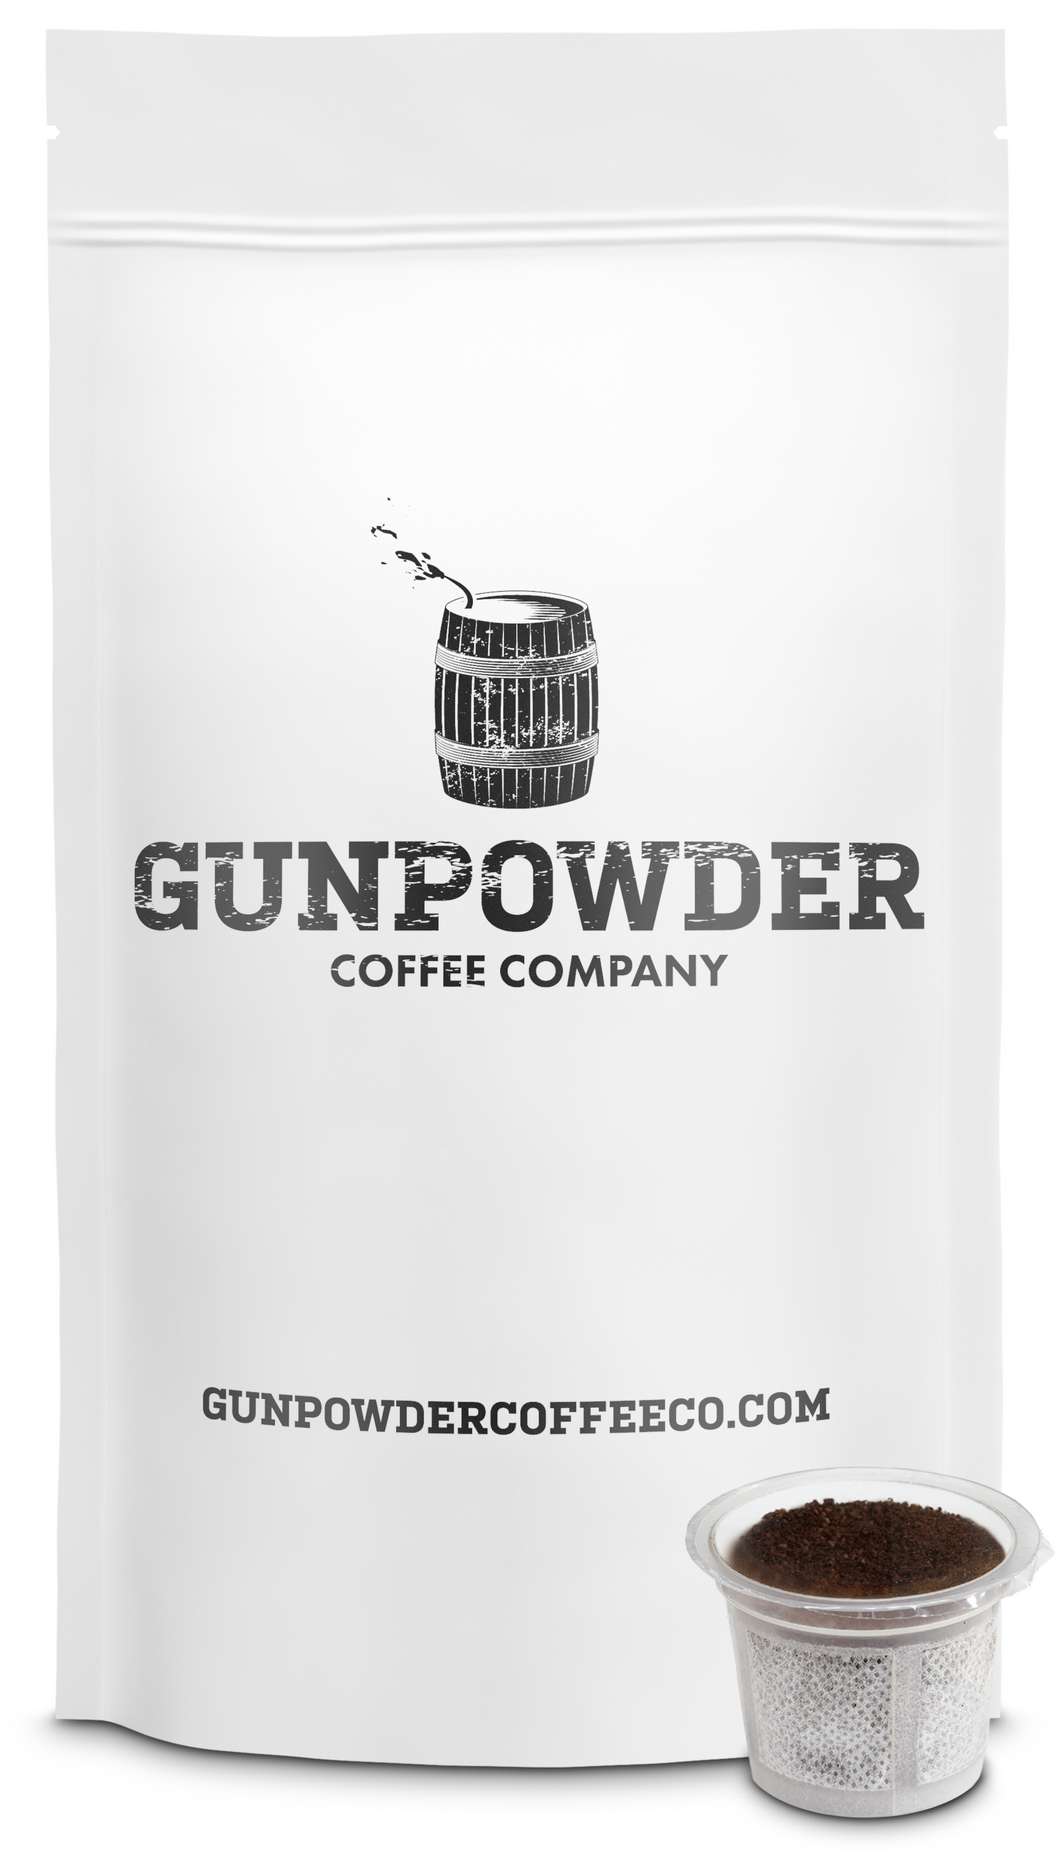 Gunpowder Coffee Cups - The World's Most Caffeinated Single Serve Coffee (K-Cup Style)